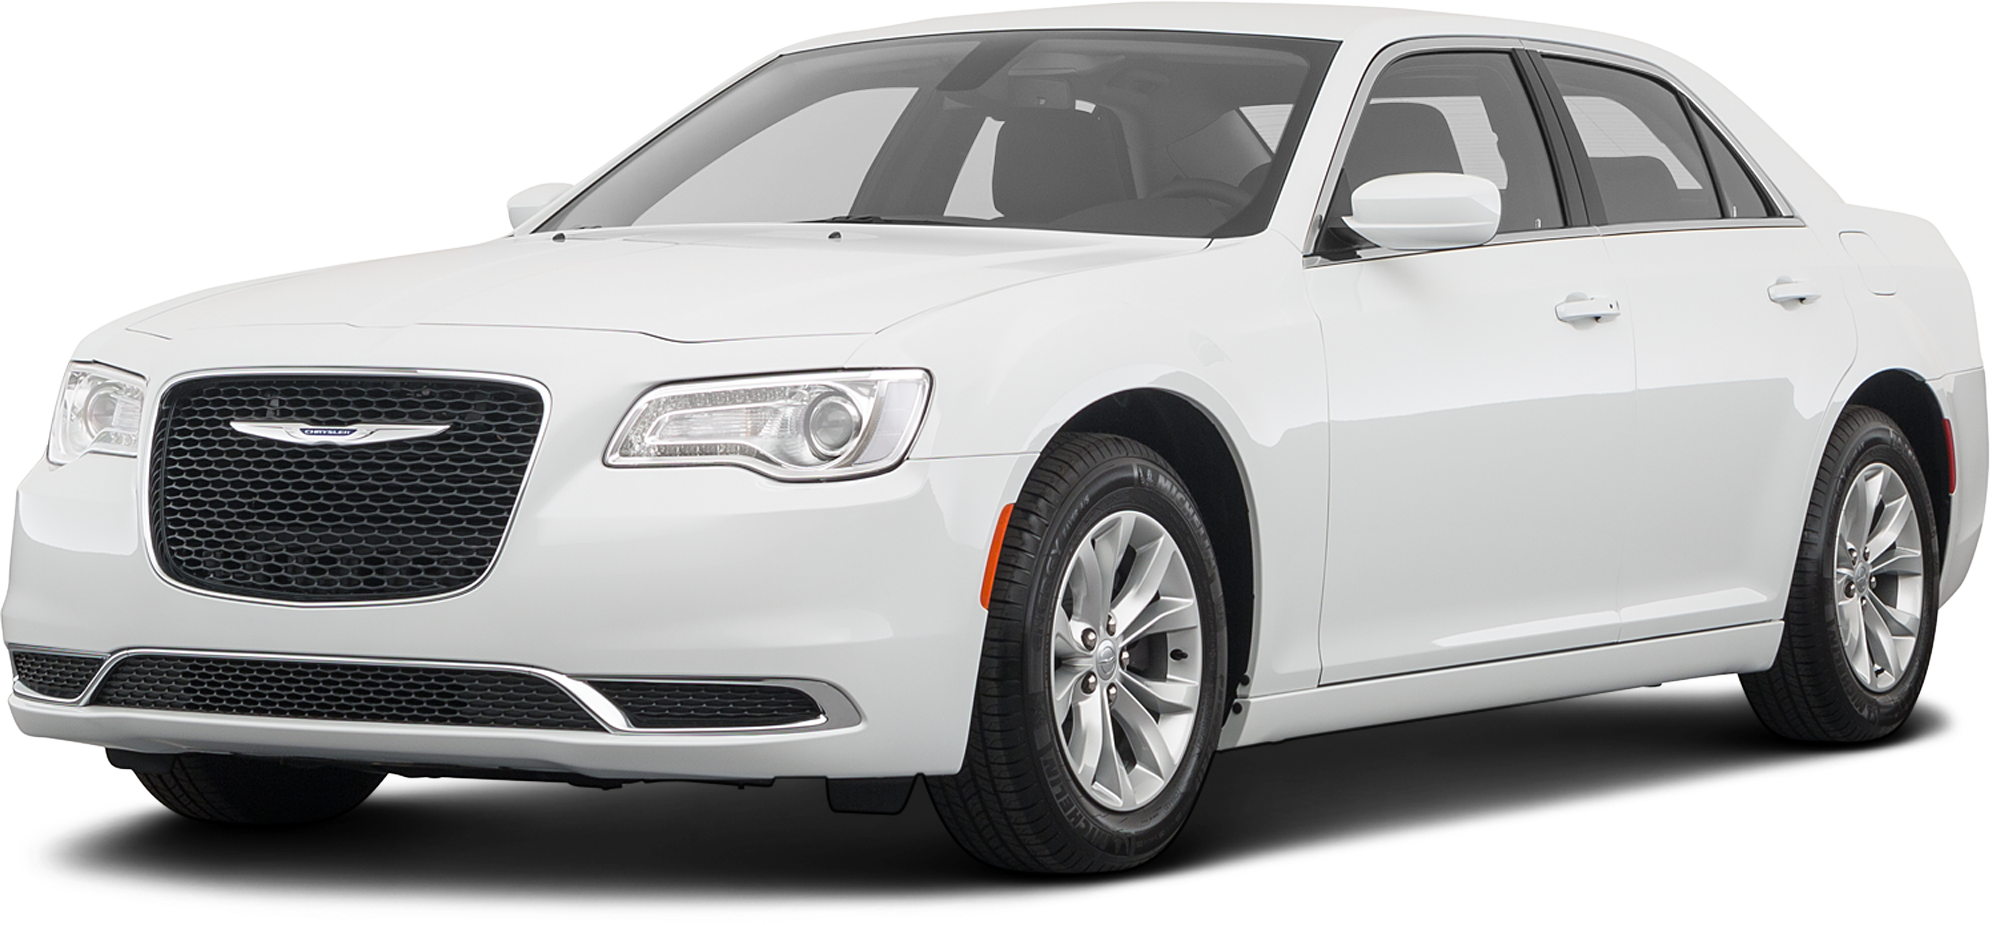 2020-chrysler-300-incentives-specials-offers-in-fond-du-lac-wi